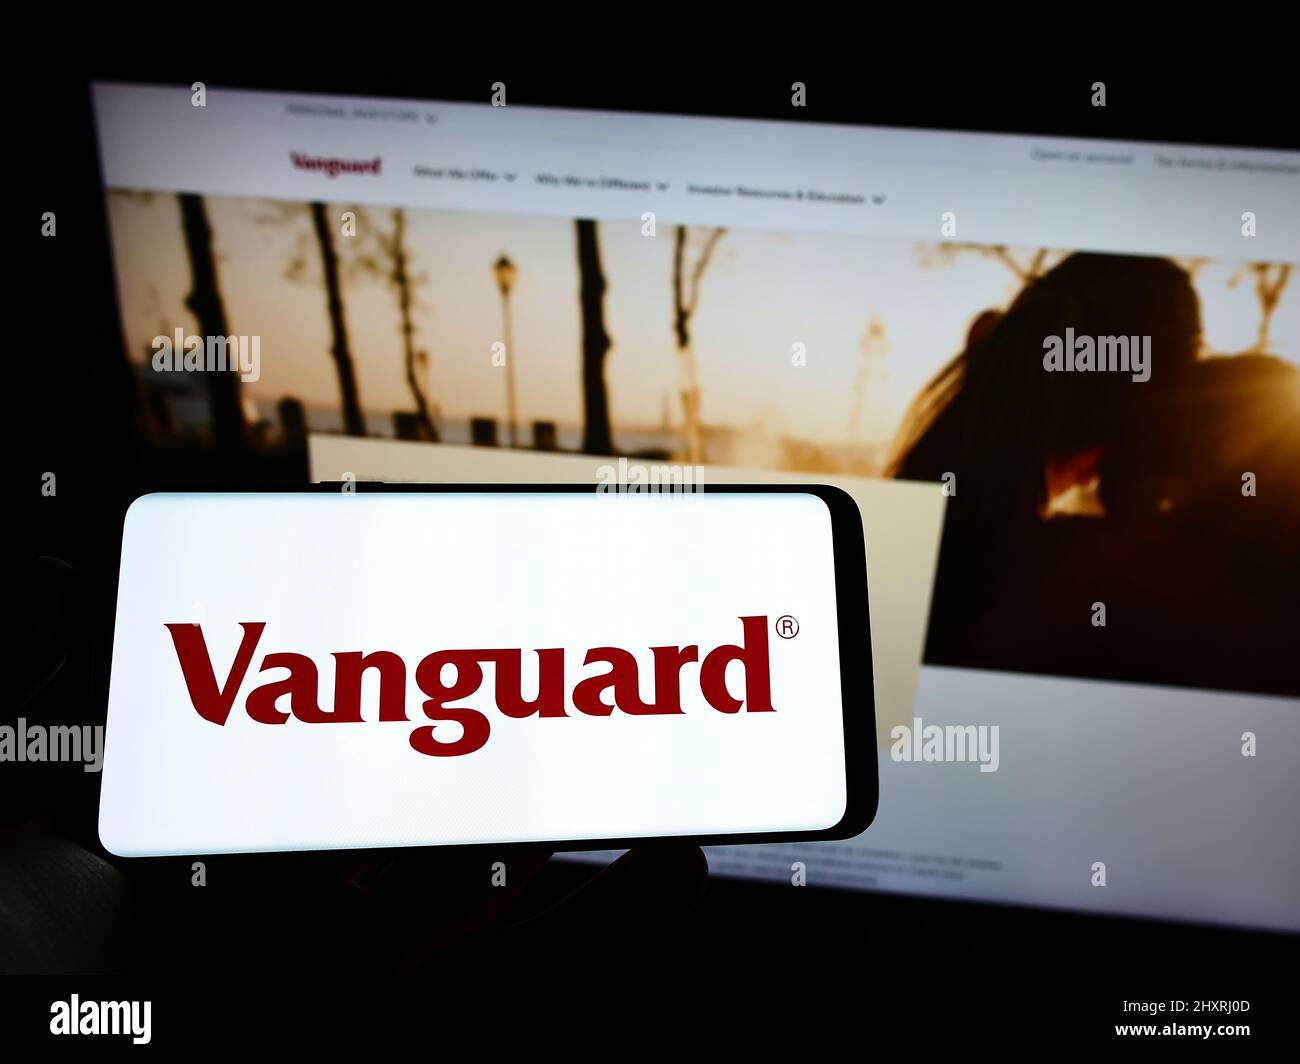 Person holding cellphone with logo of US financial company The Vanguard Group Inc. on screen in front of business web page. Focus on phone display. Stock Photo